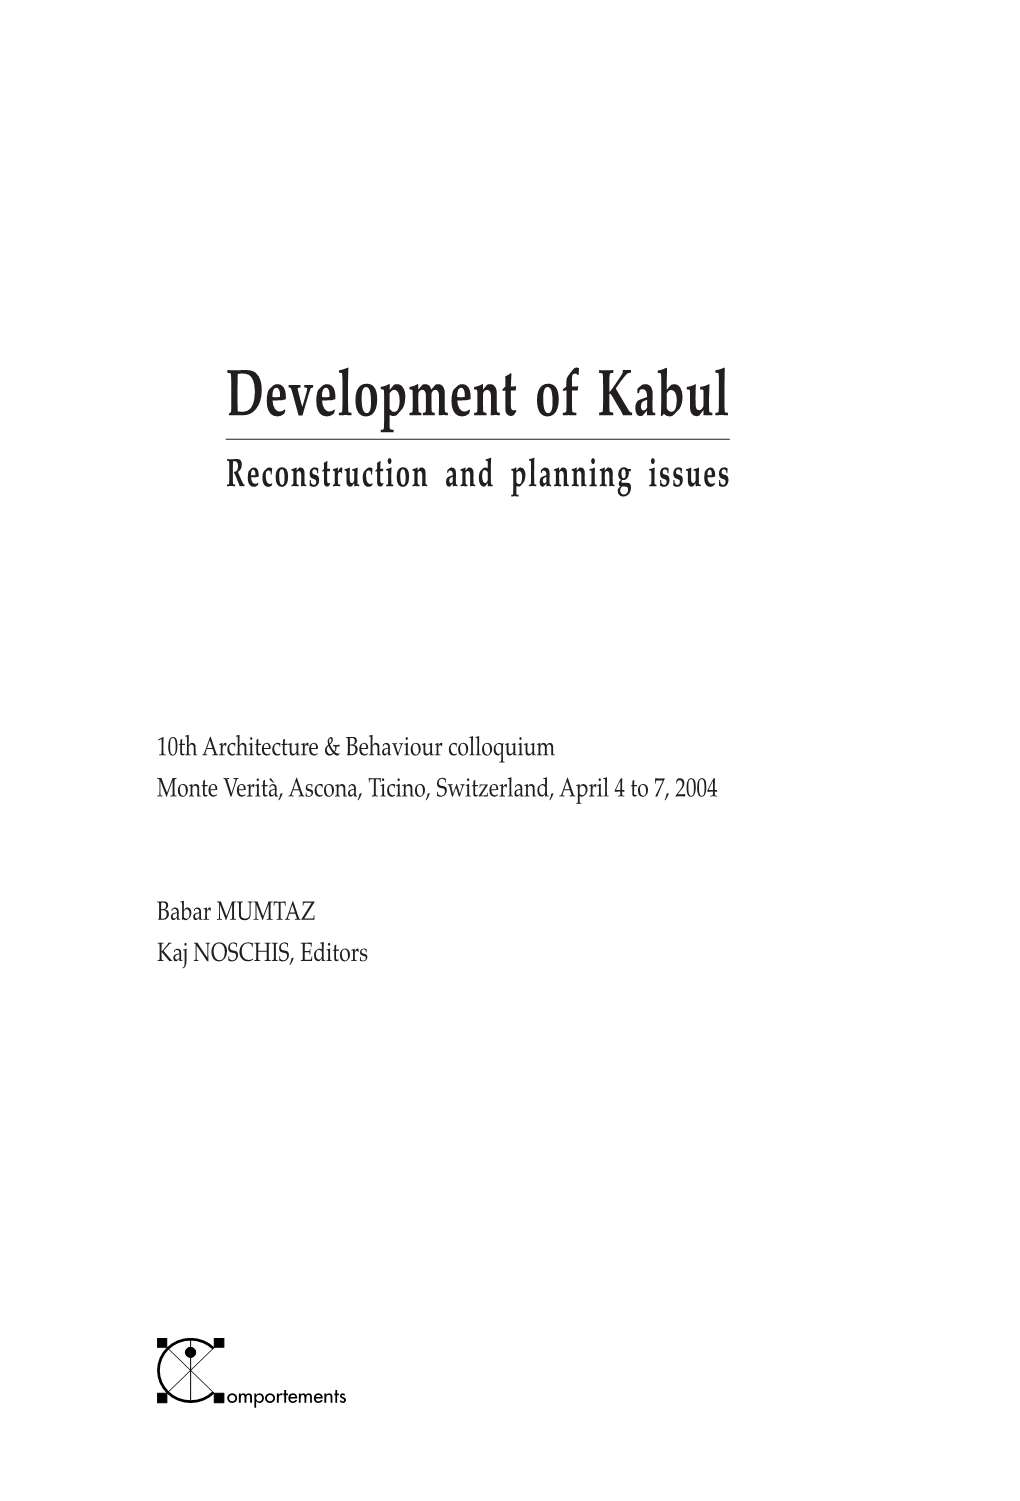 Development of Kabul Reconstruction and Planning Issues